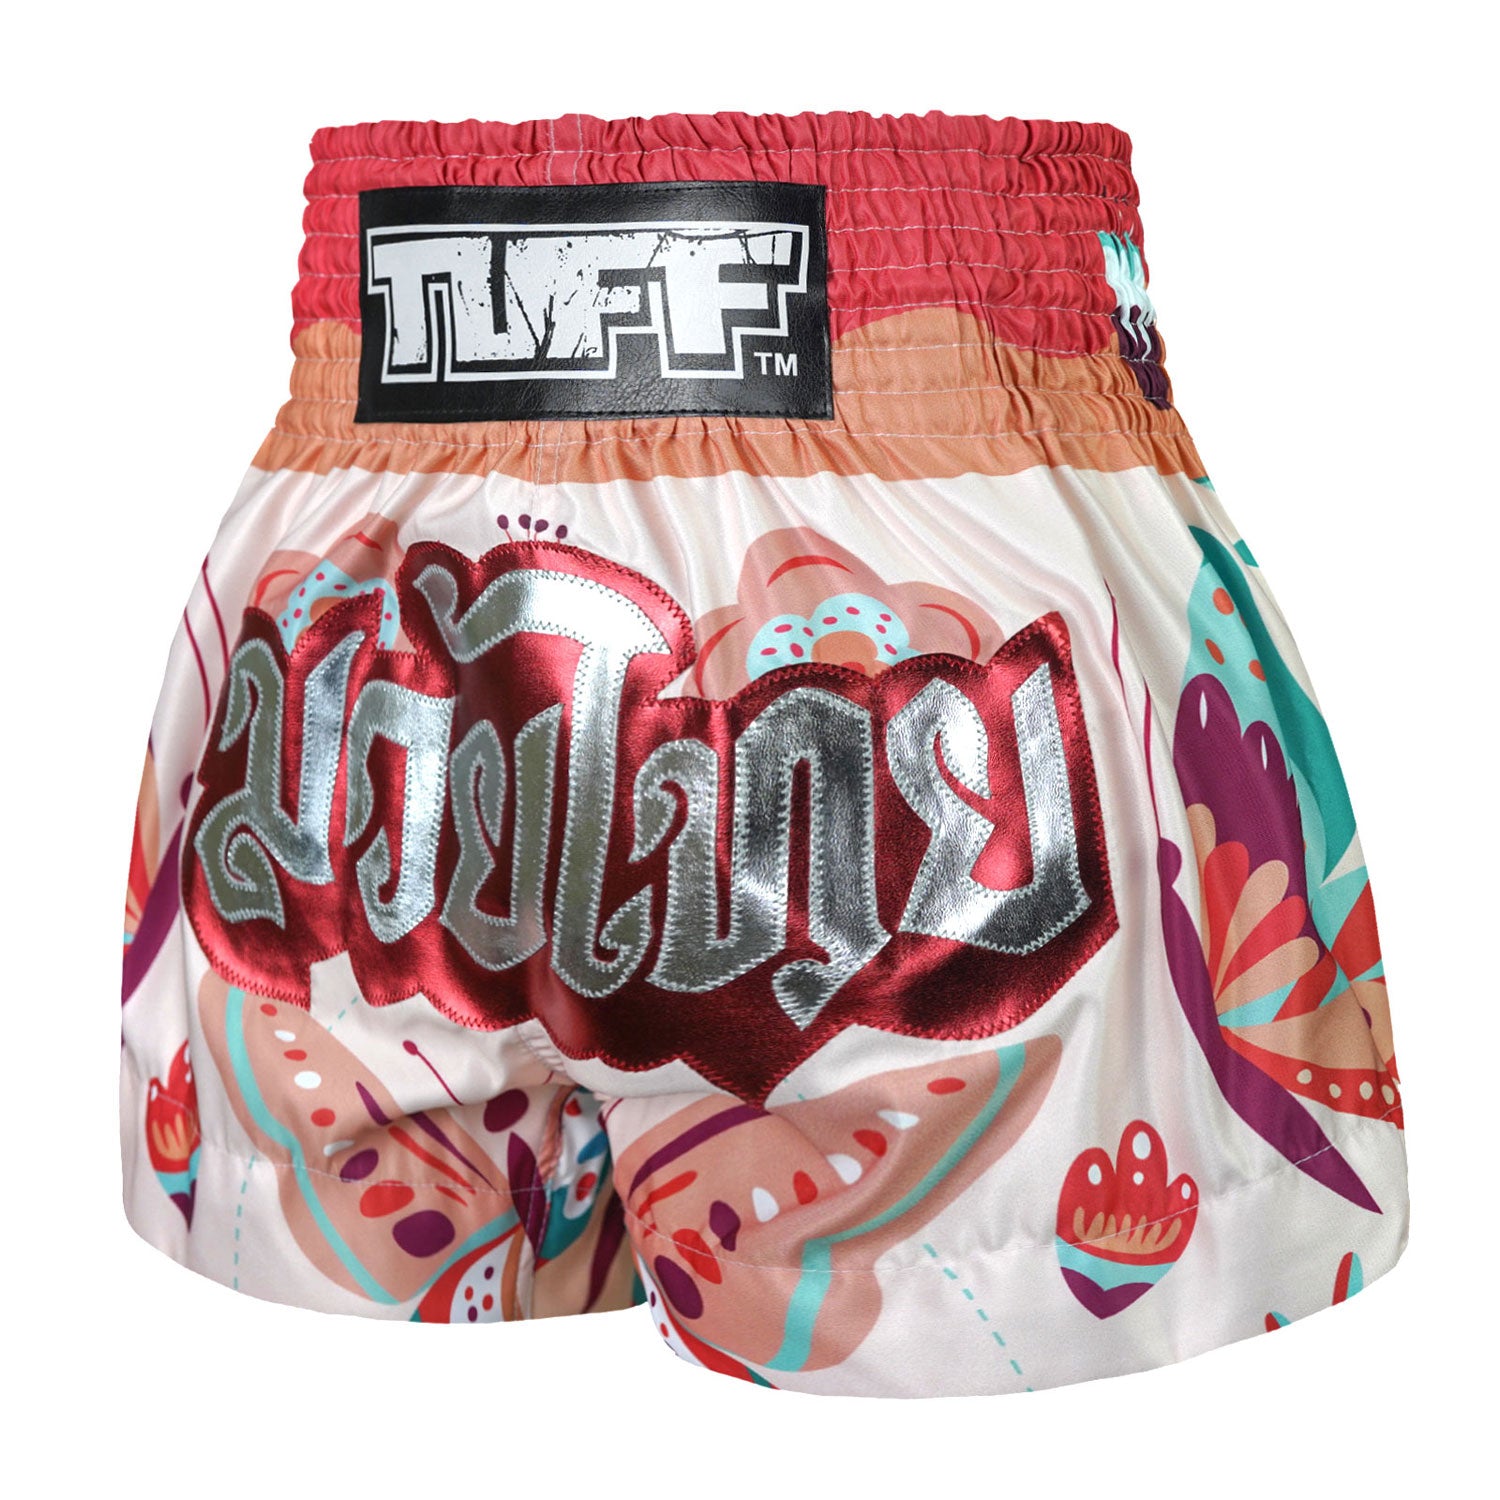 MS679 TUFF Muay Thai Shorts The Candy Wings